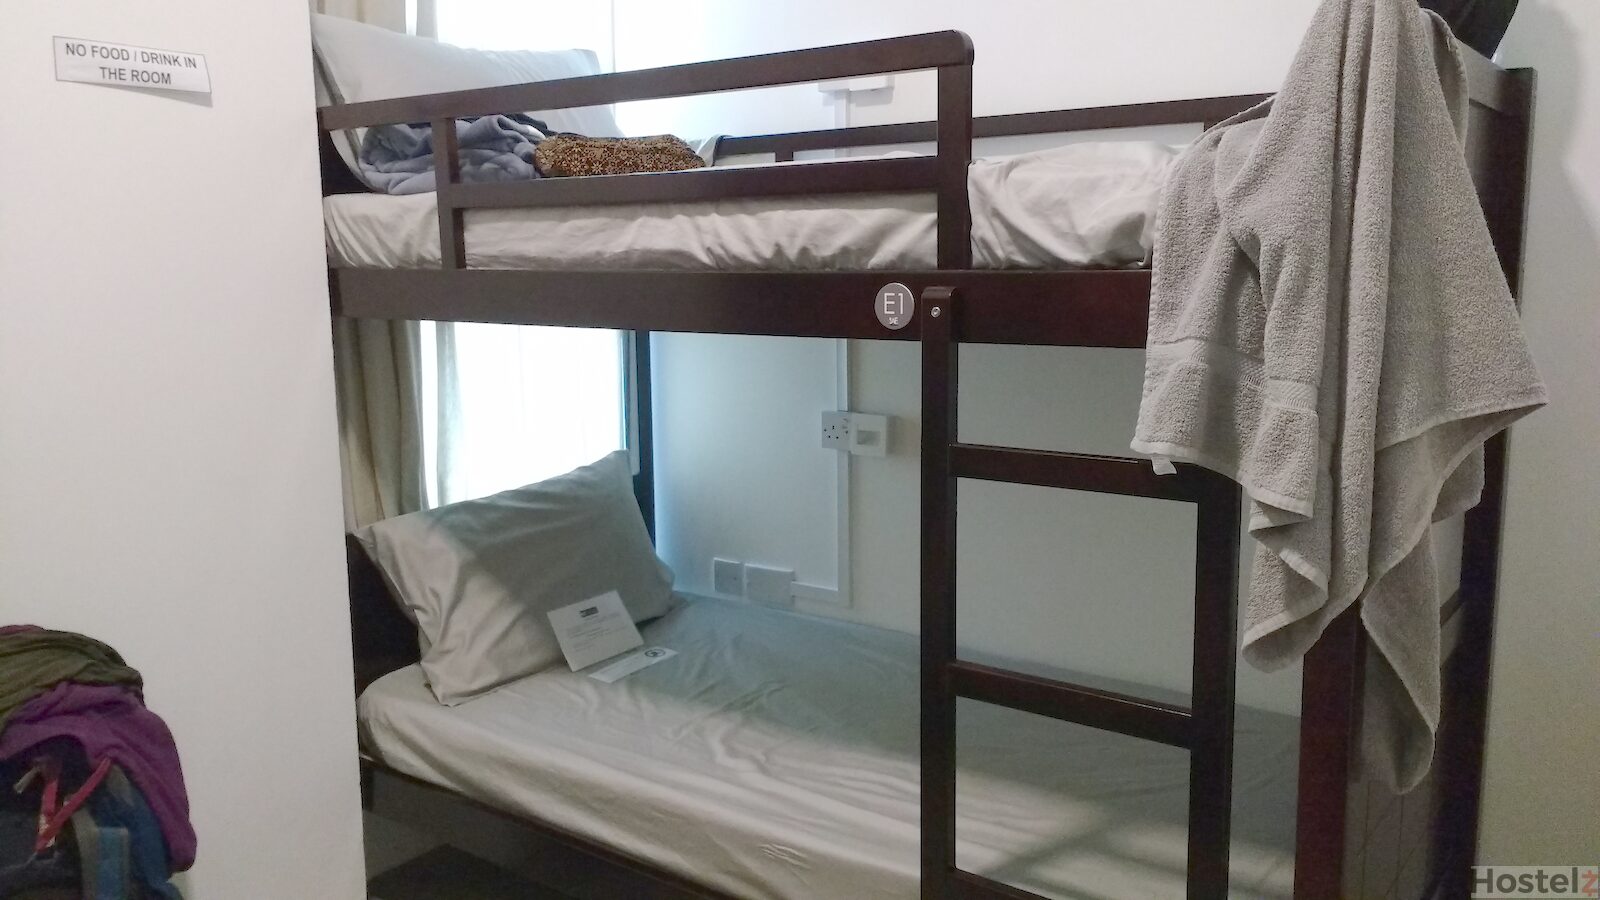 good solid bunkbeds